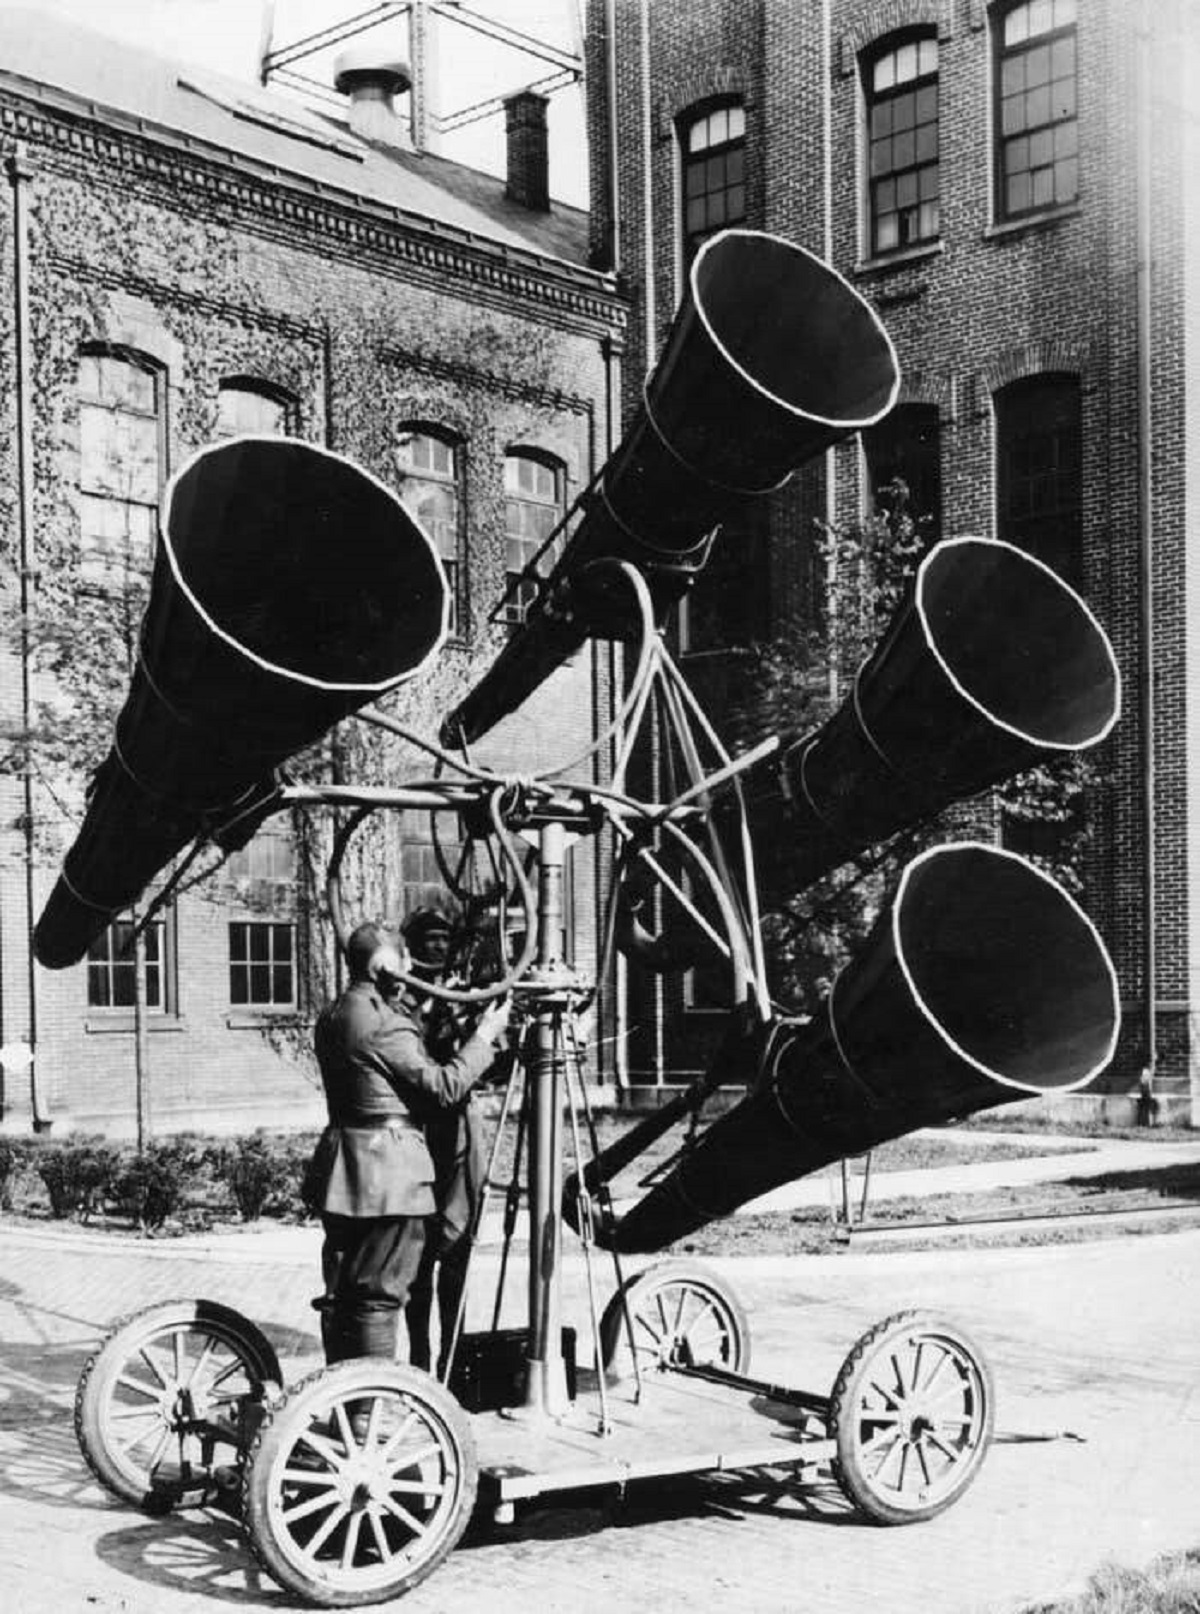 Before the invention of radar, this is one way people used to listen to and detect enemy planes: